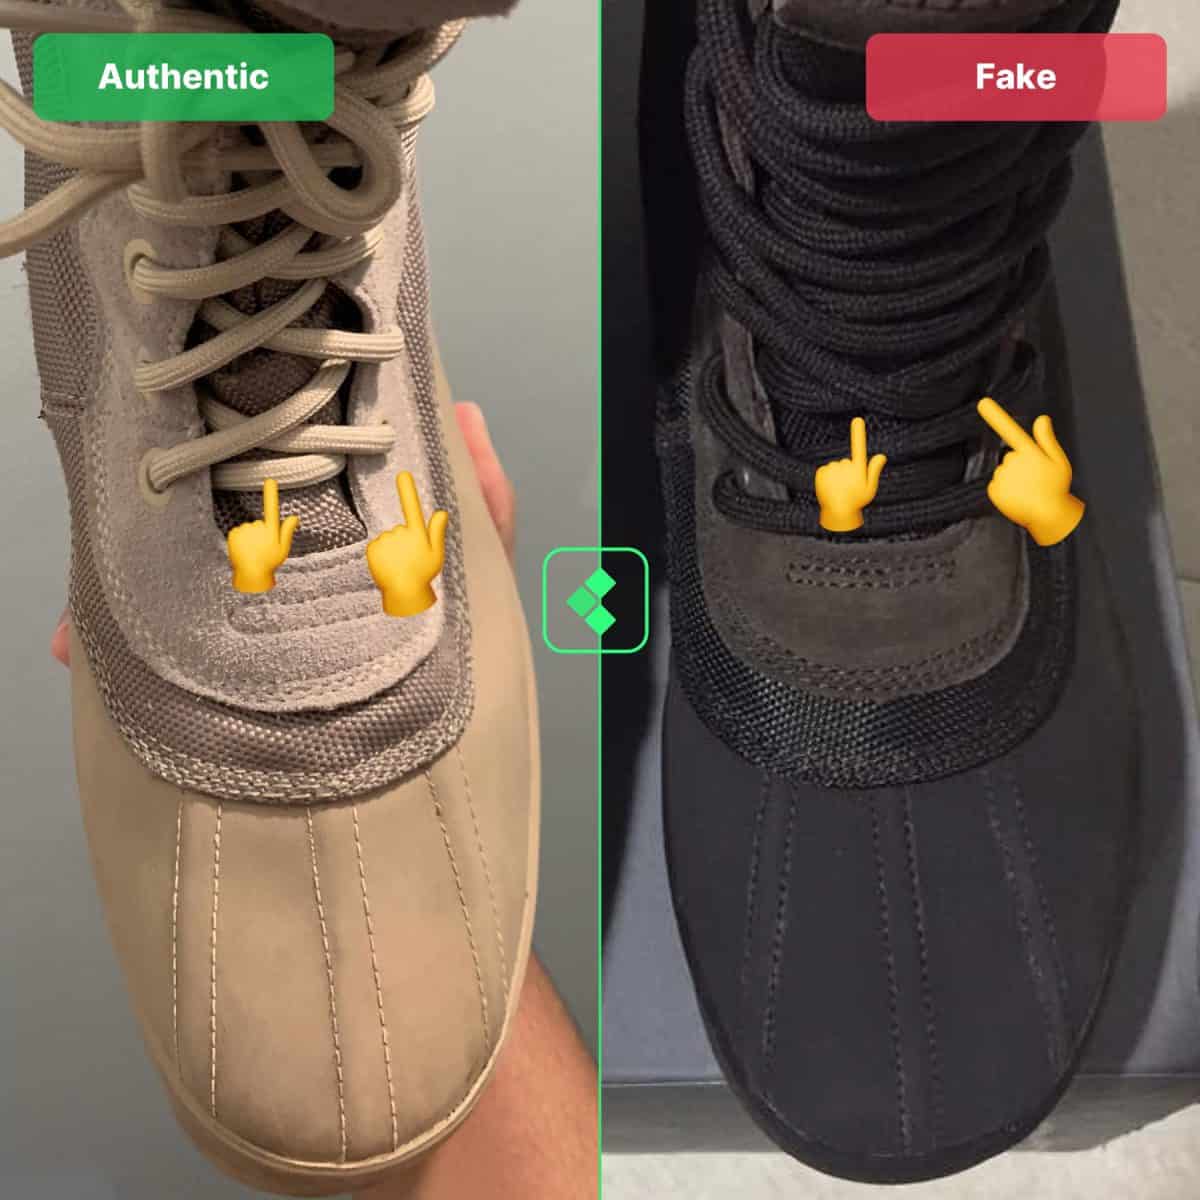 yeezy 950 boots real vs fake